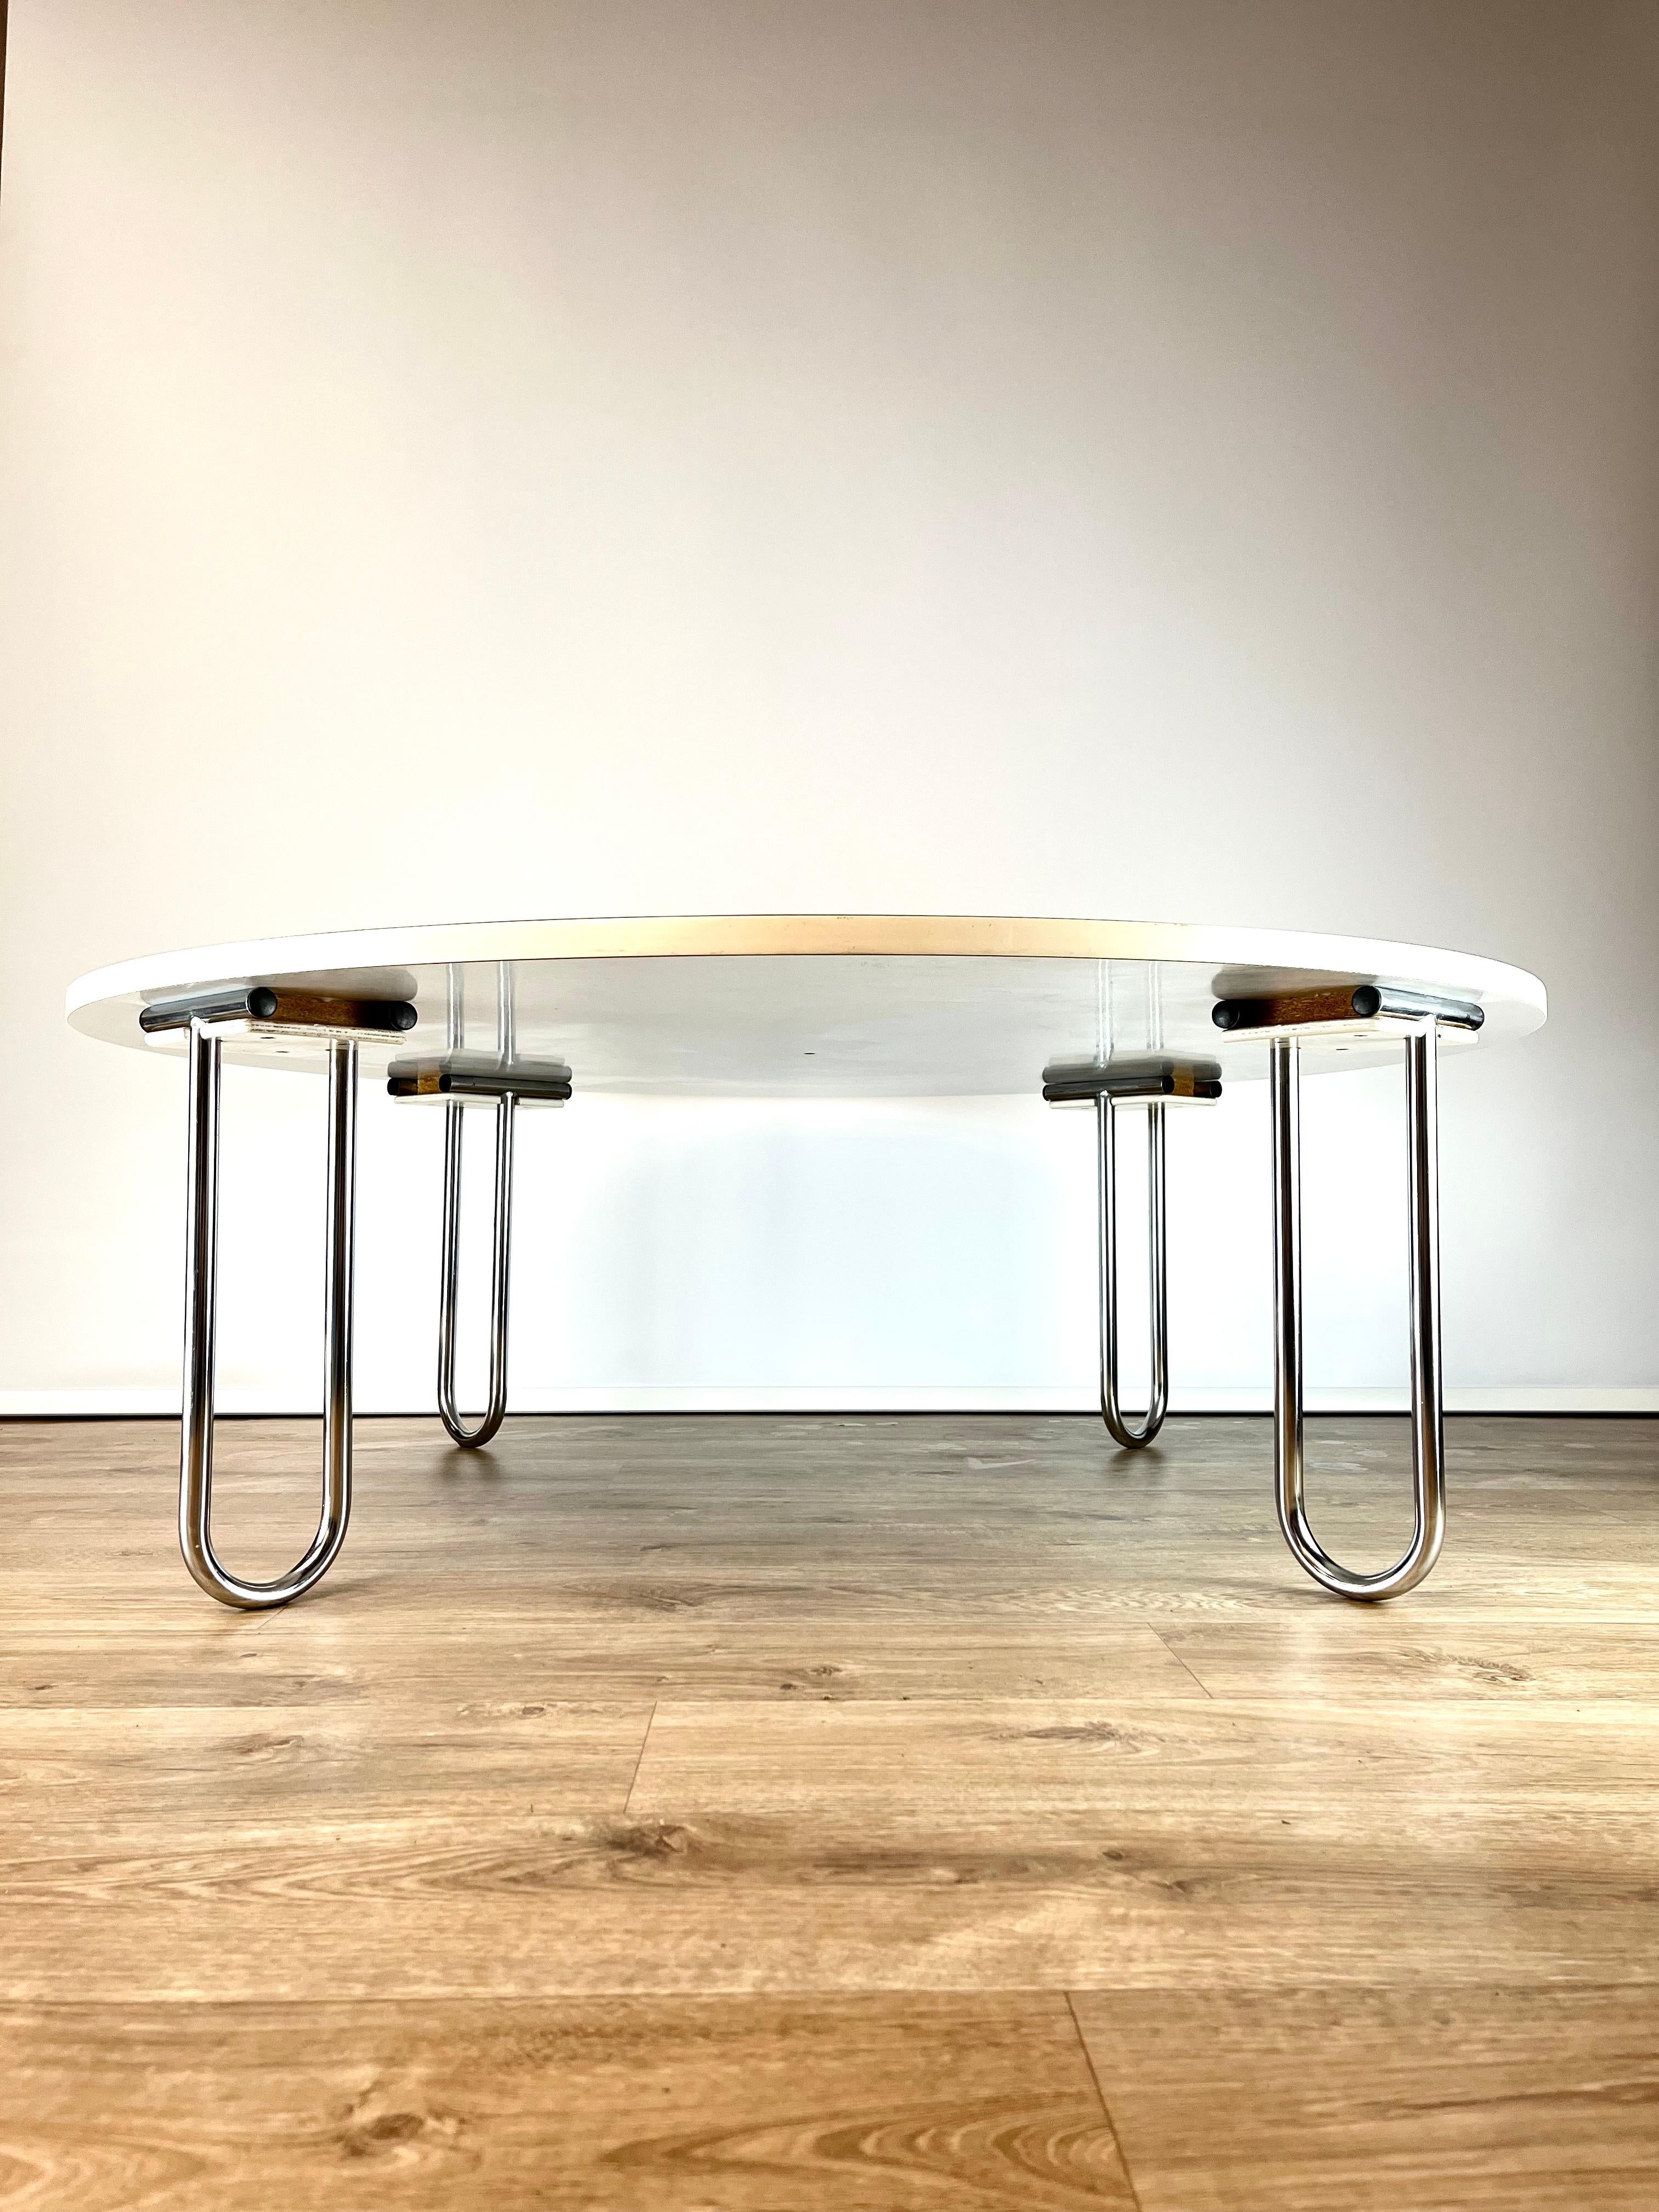 This thoroughly 1960s coffee table wouldn’t look out of place on the set of an Austin Powers film…Designed by Ruud Ekstrand & Christer Norman and produced by Swedish firm DUX, it features 4 looped chrome legs and a white melamine top, which is